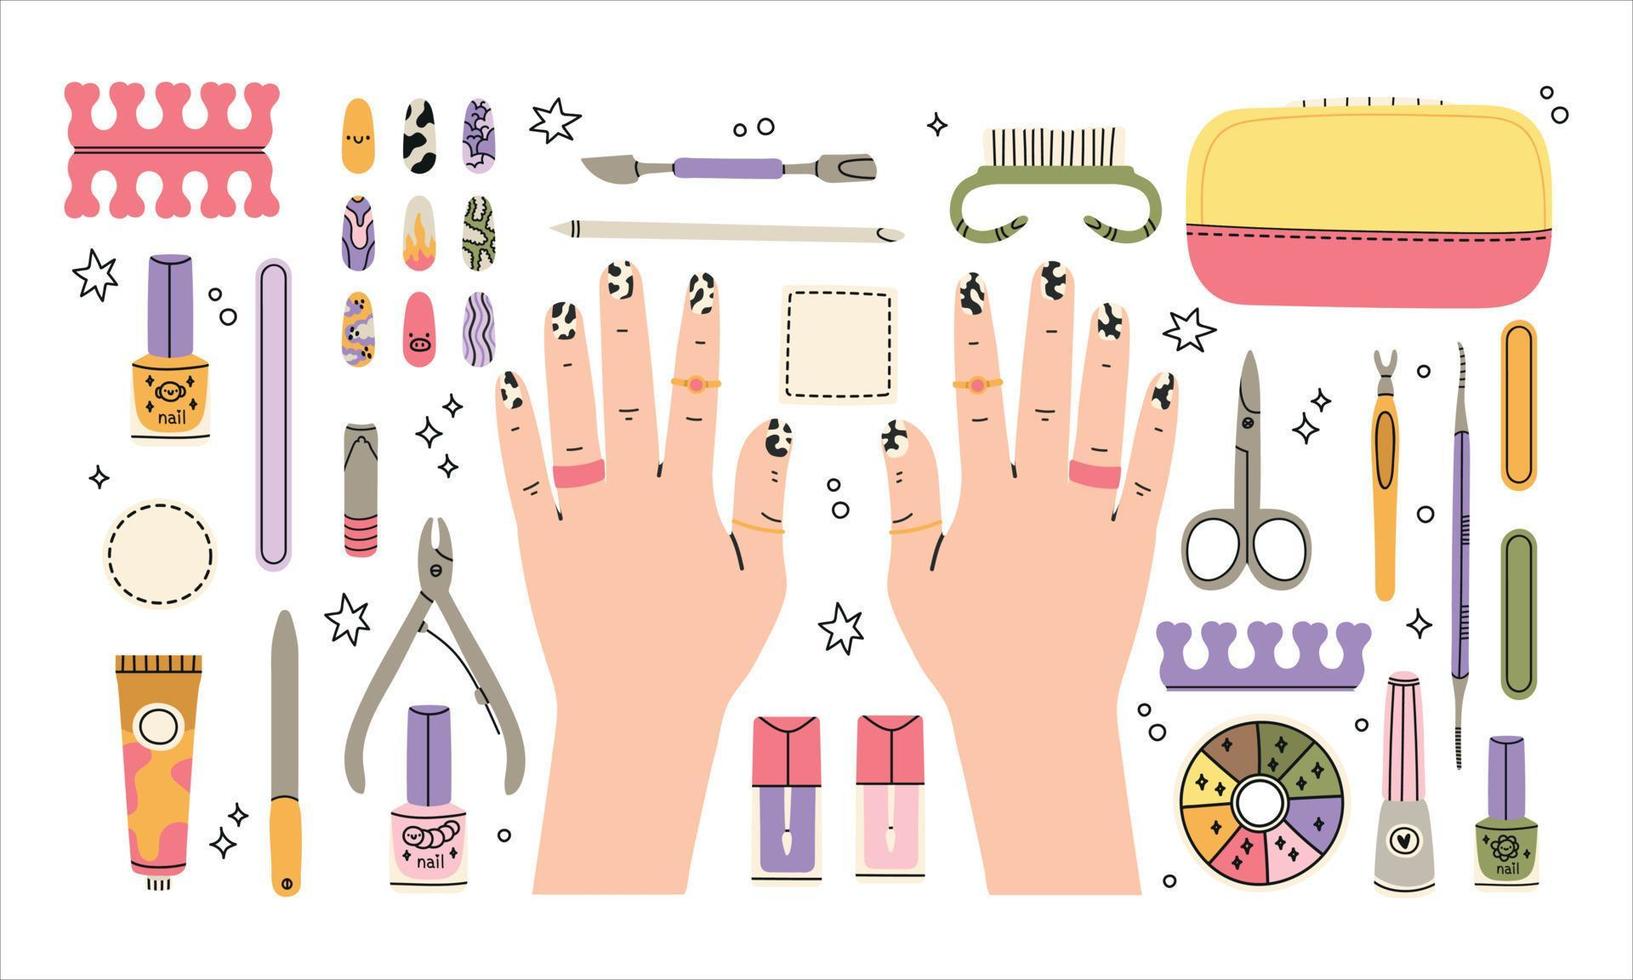 Cartoon female manicured hands, manicure salon nail care routine. Women's hands and various manicure supplies, equipment, tools. Nail scissors, nail file, tweezers, nail polish, hand cream, brush. vector